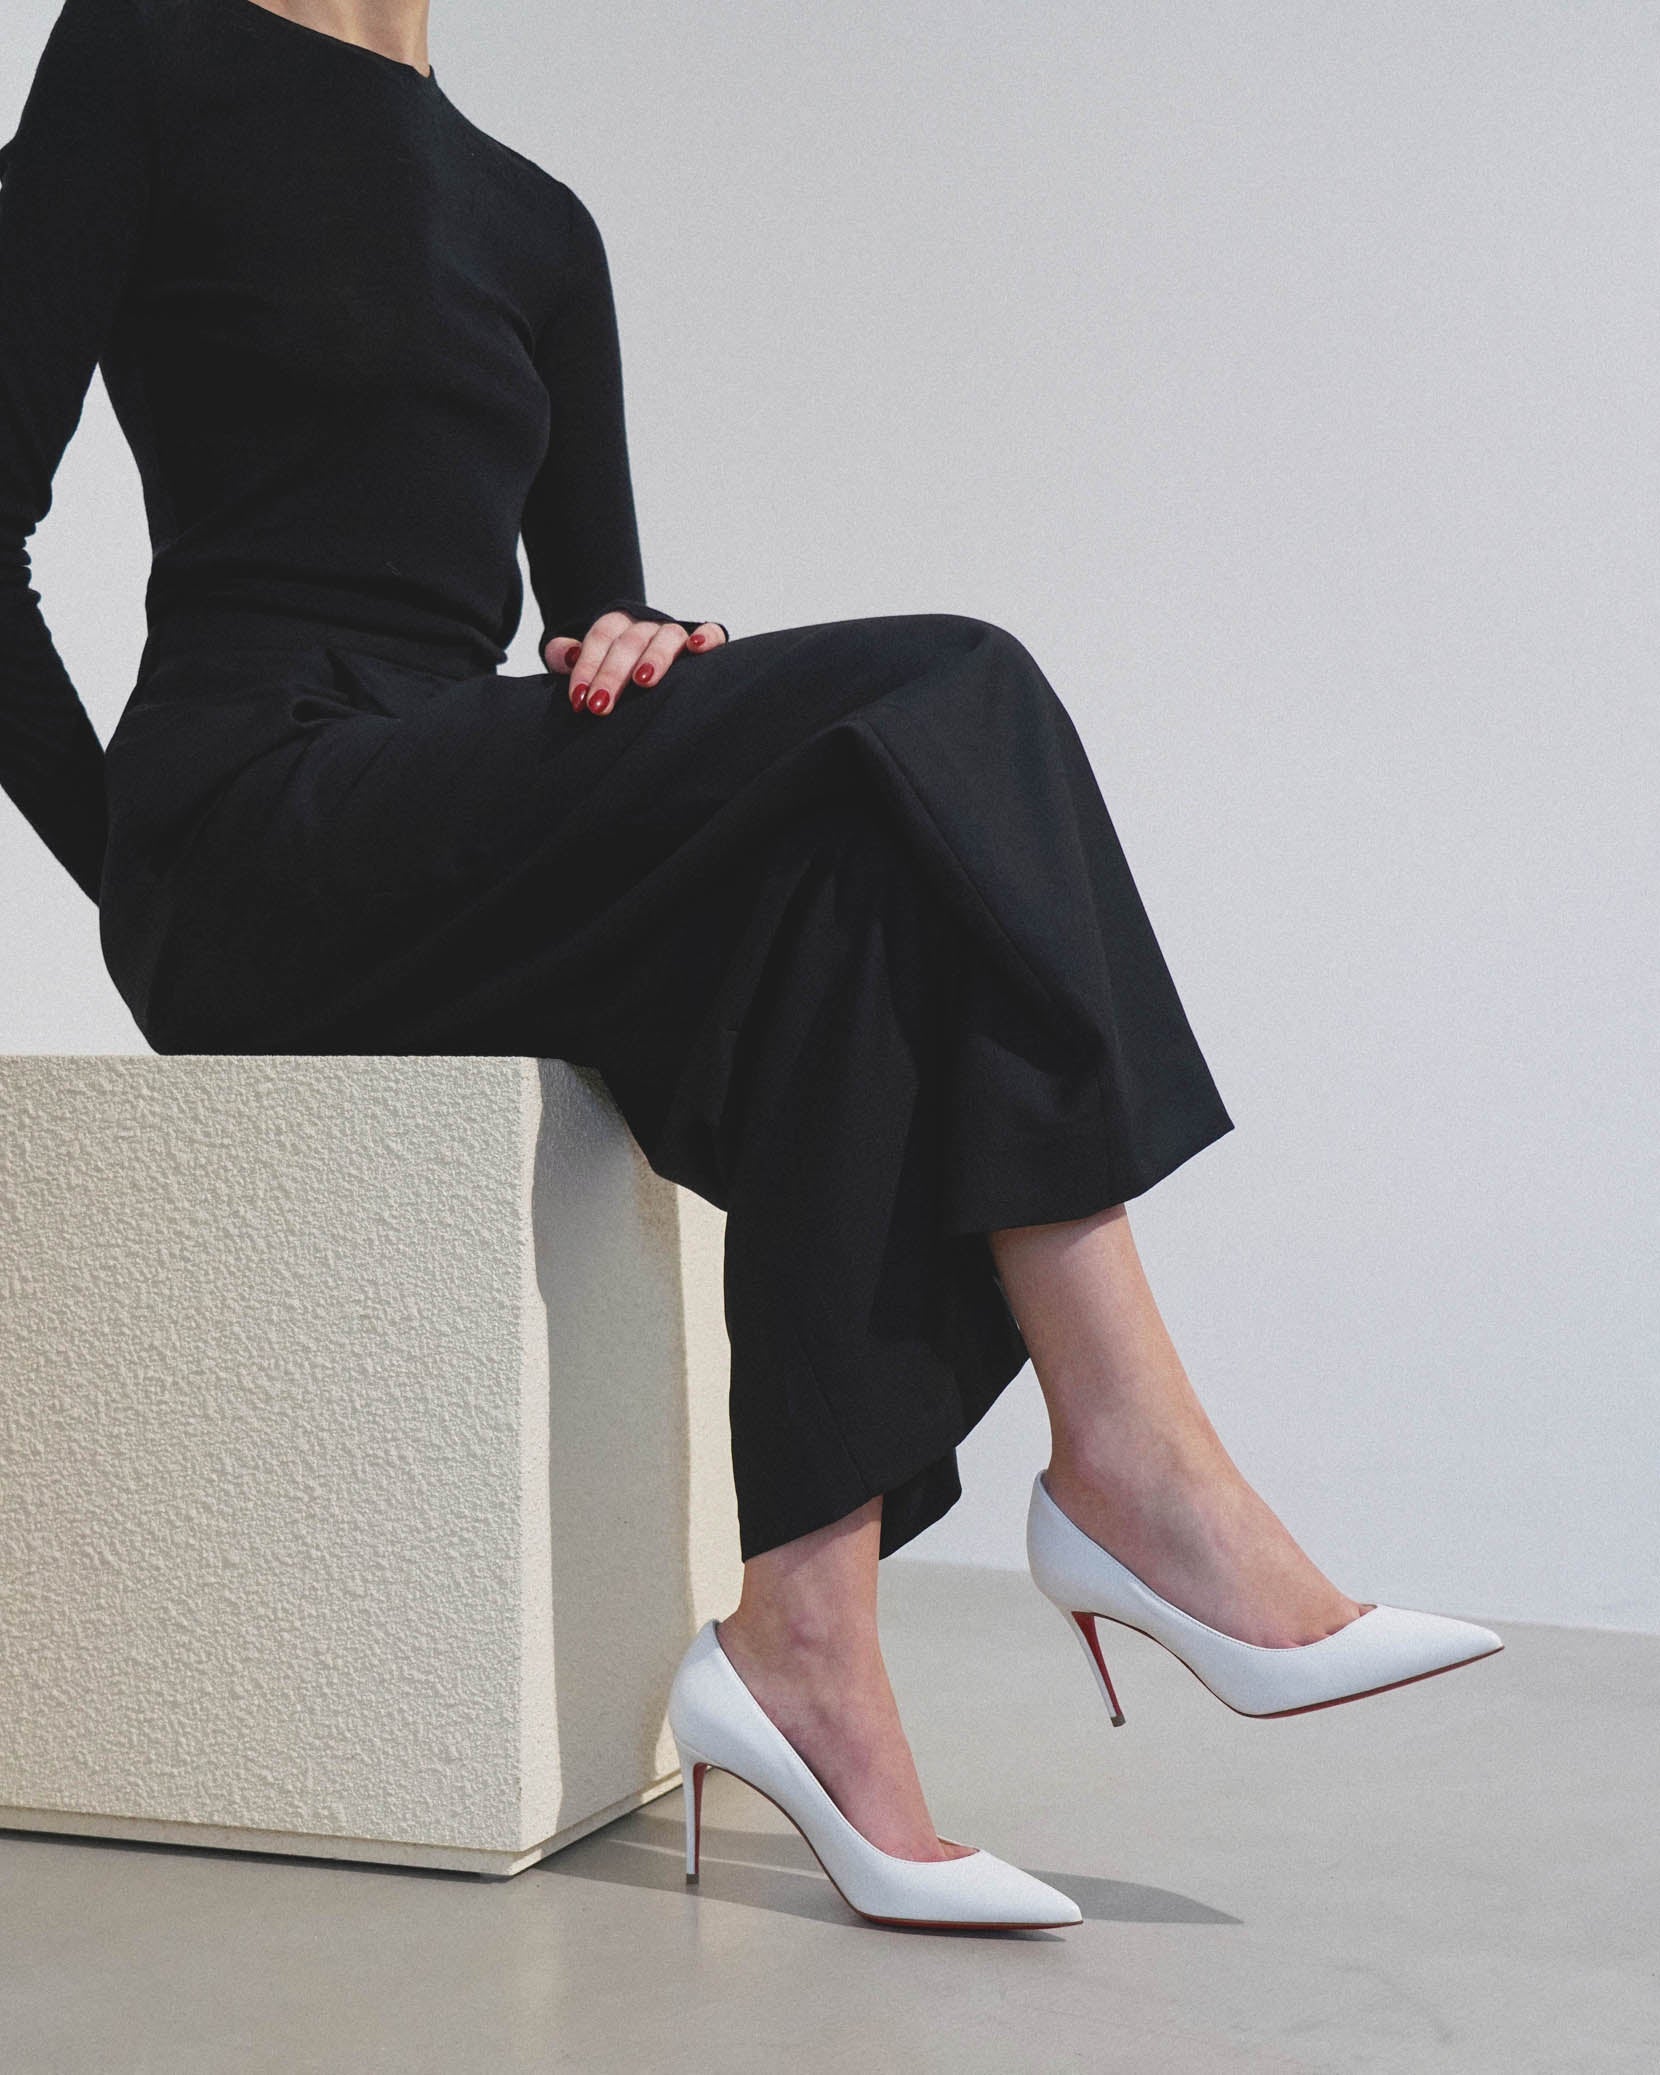 Kate 85 white leather pumps